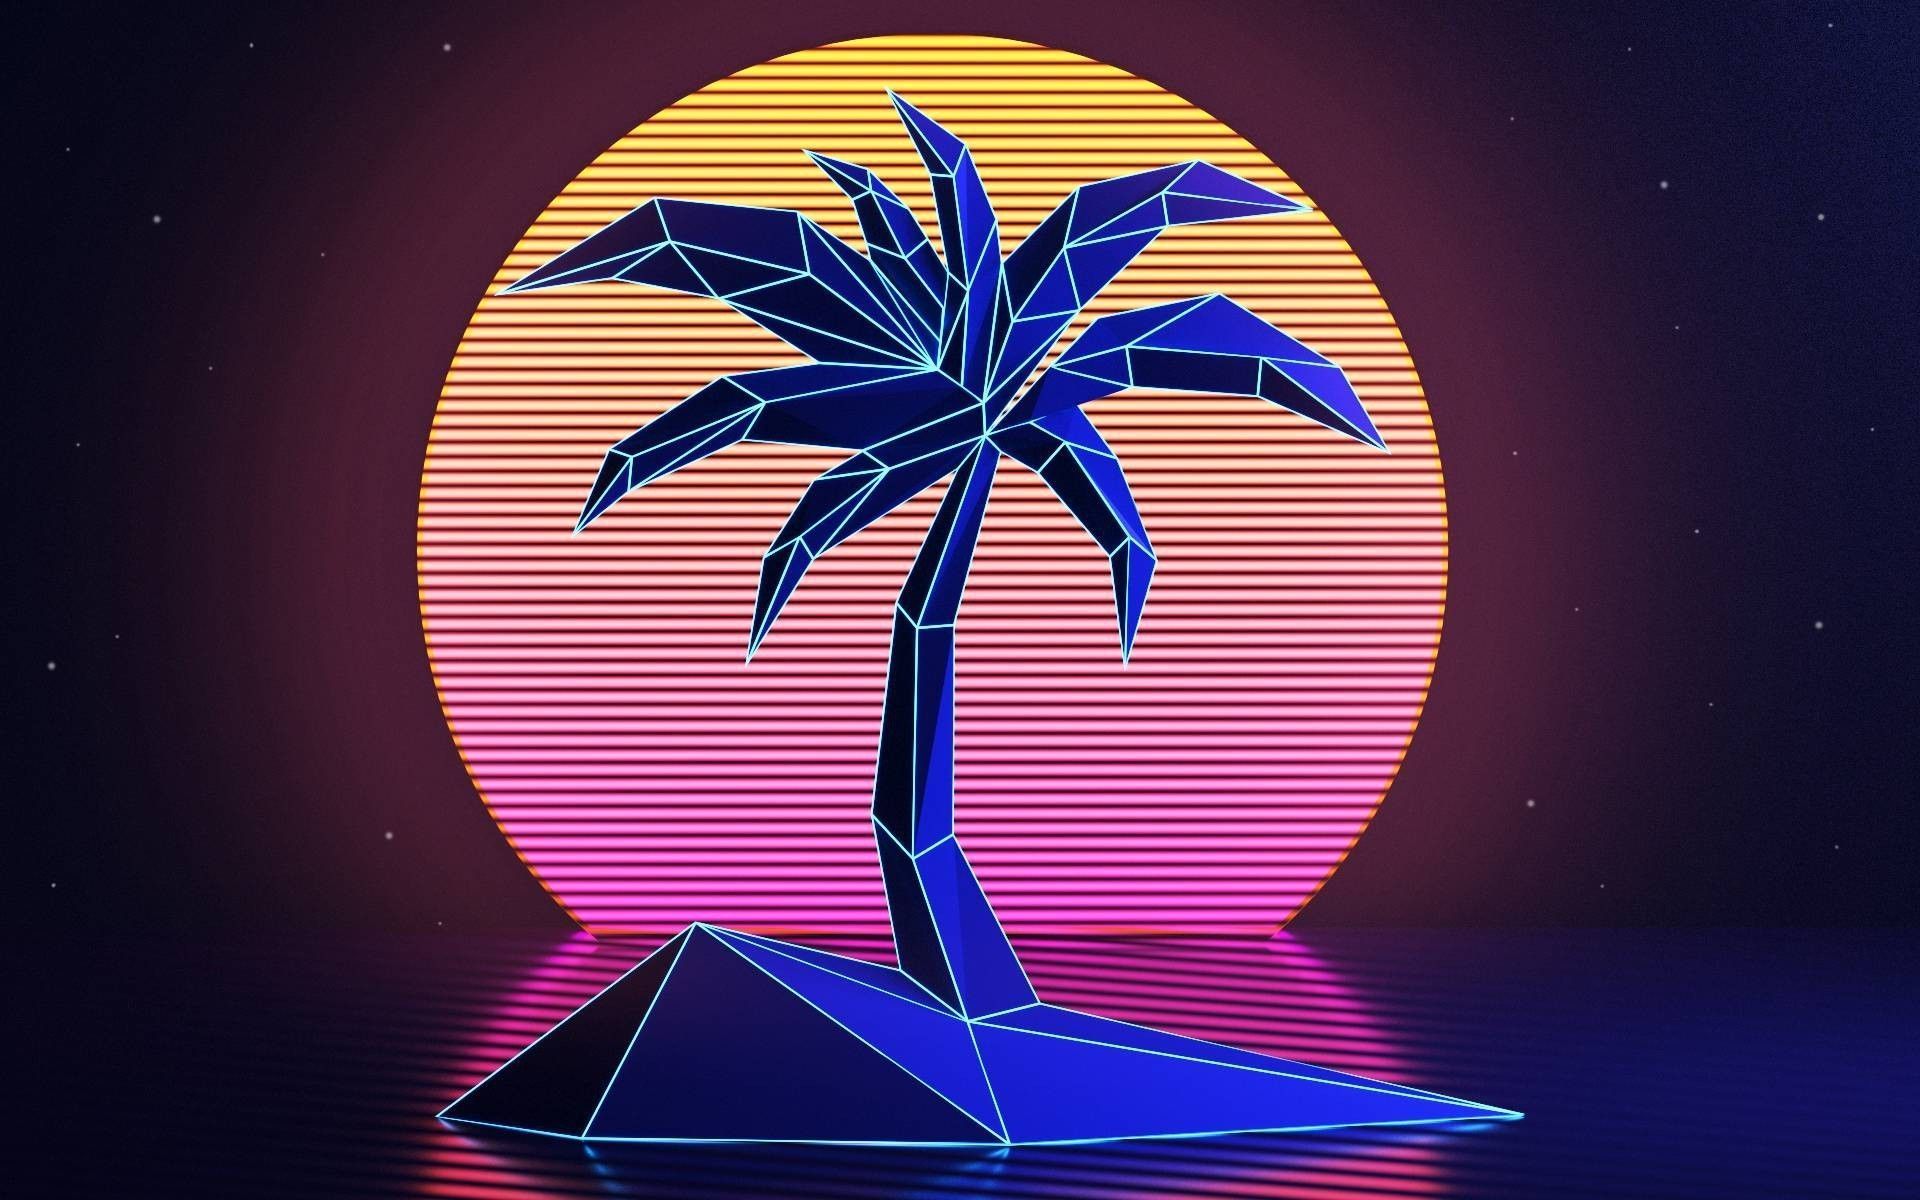 A neon palm tree on an island with the sun setting in front of it - 80s